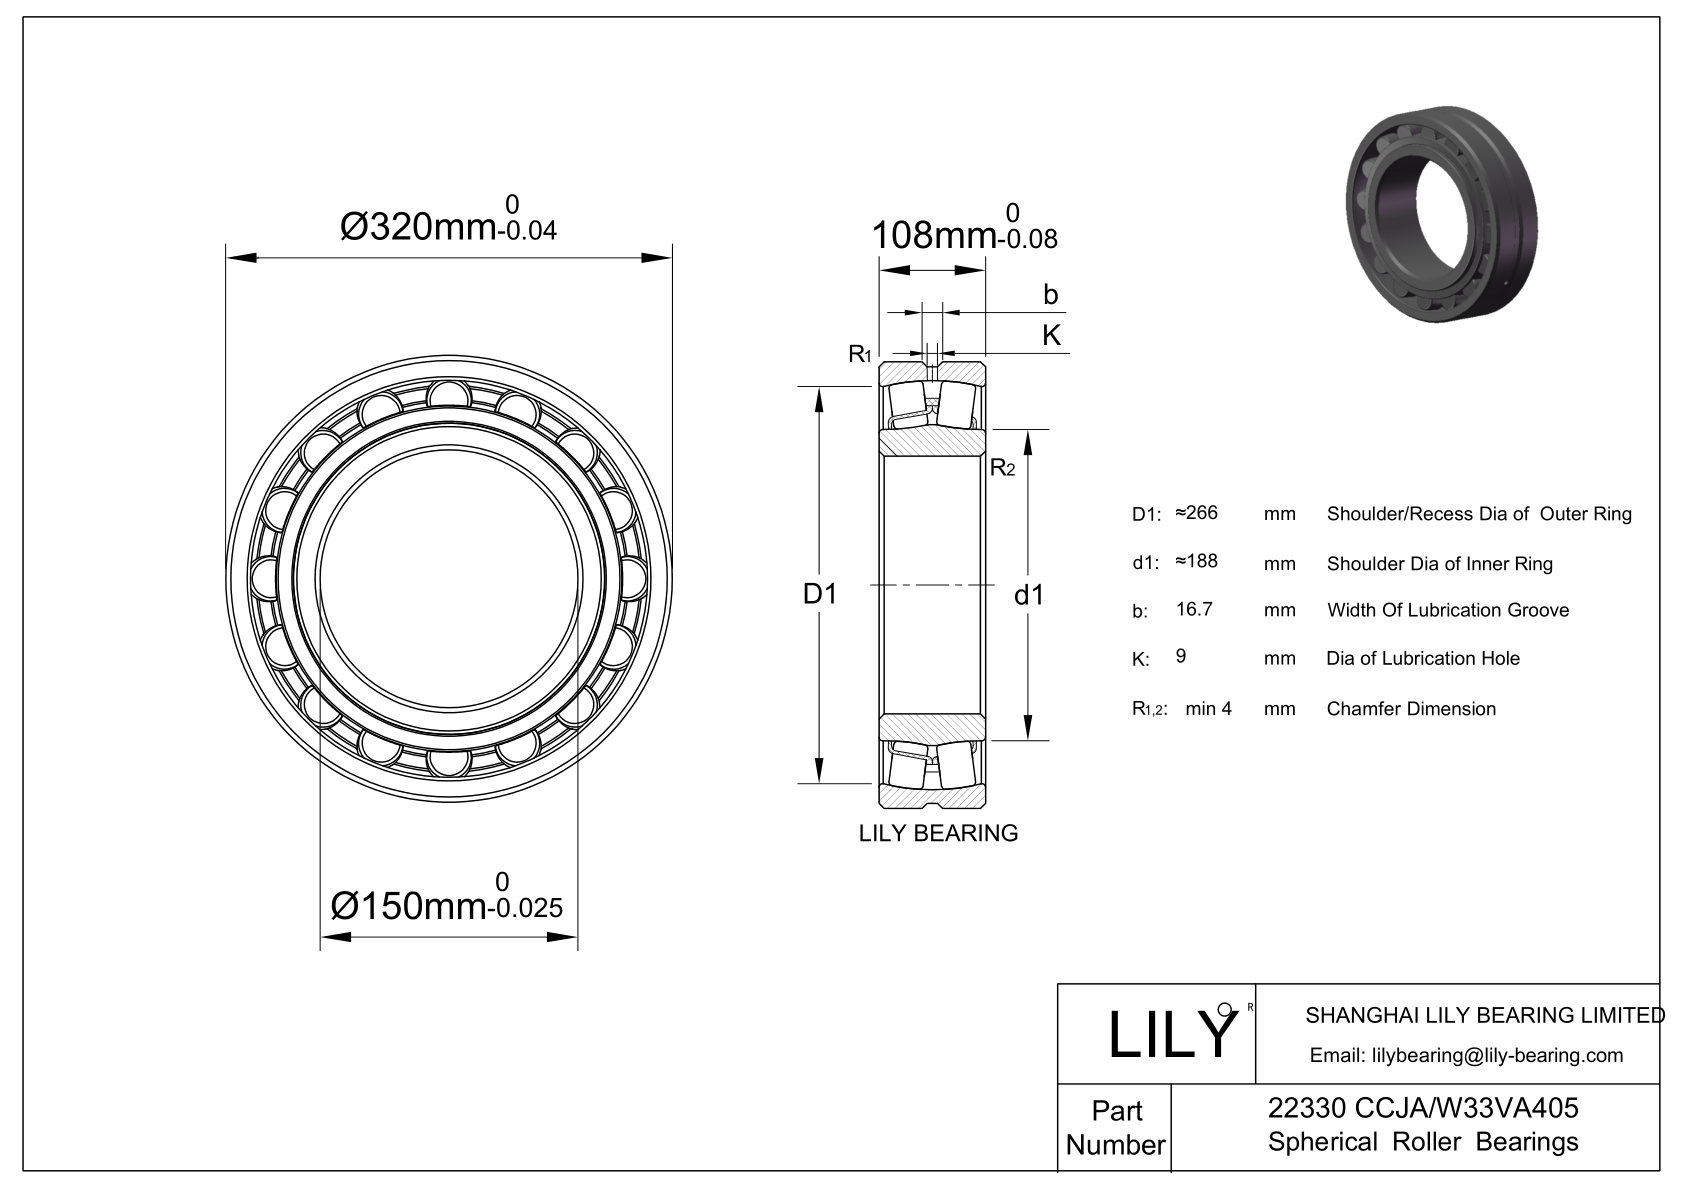 22330 CCJA/W33VA405 Double Row Spherical Roller Bearing cad drawing